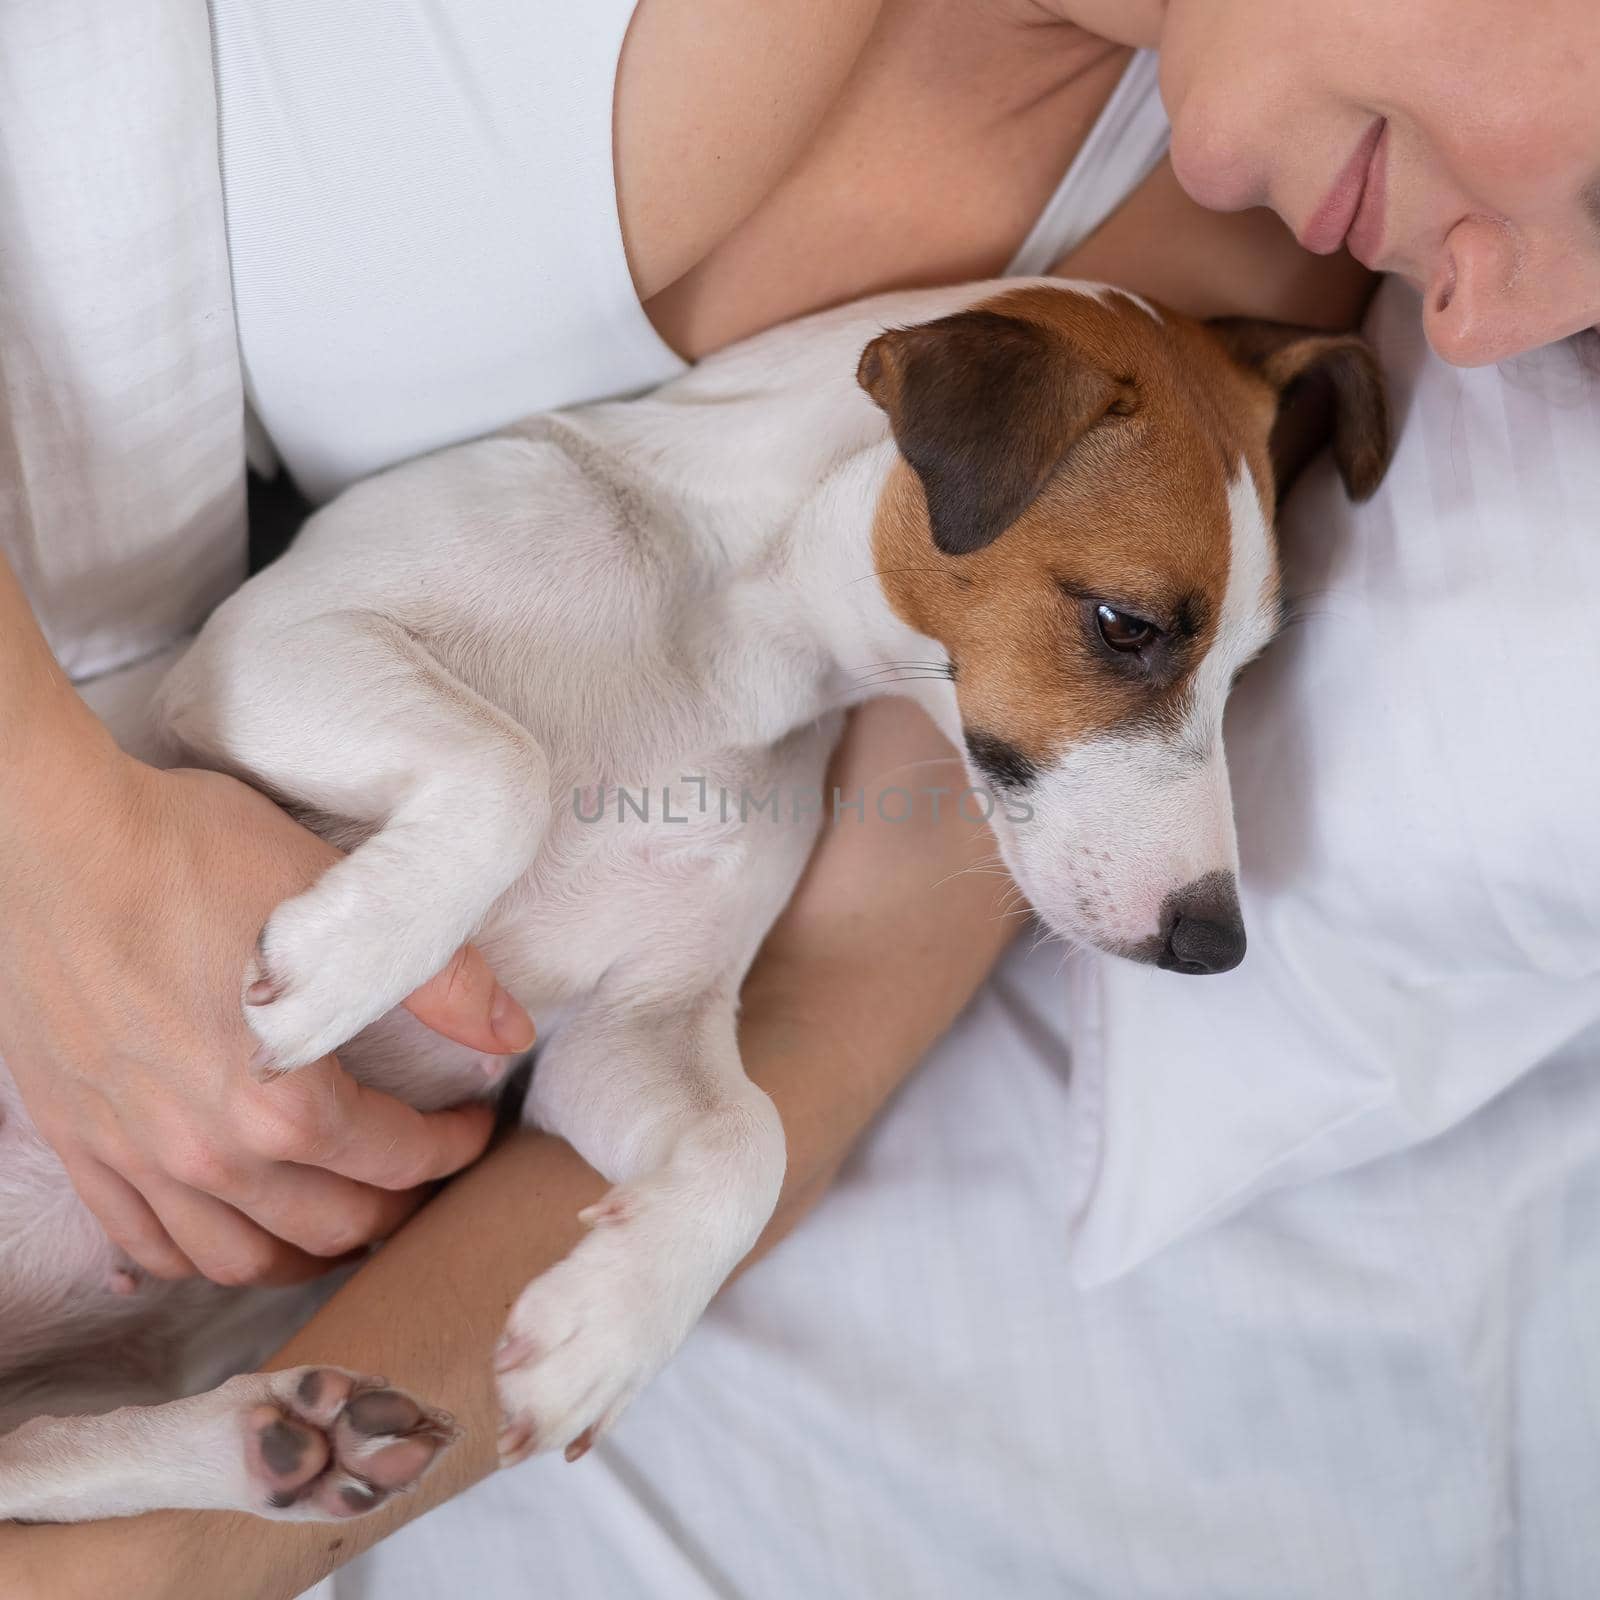 Jack Russell Terrier dog lies in an embrace with the owner in bed. by mrwed54